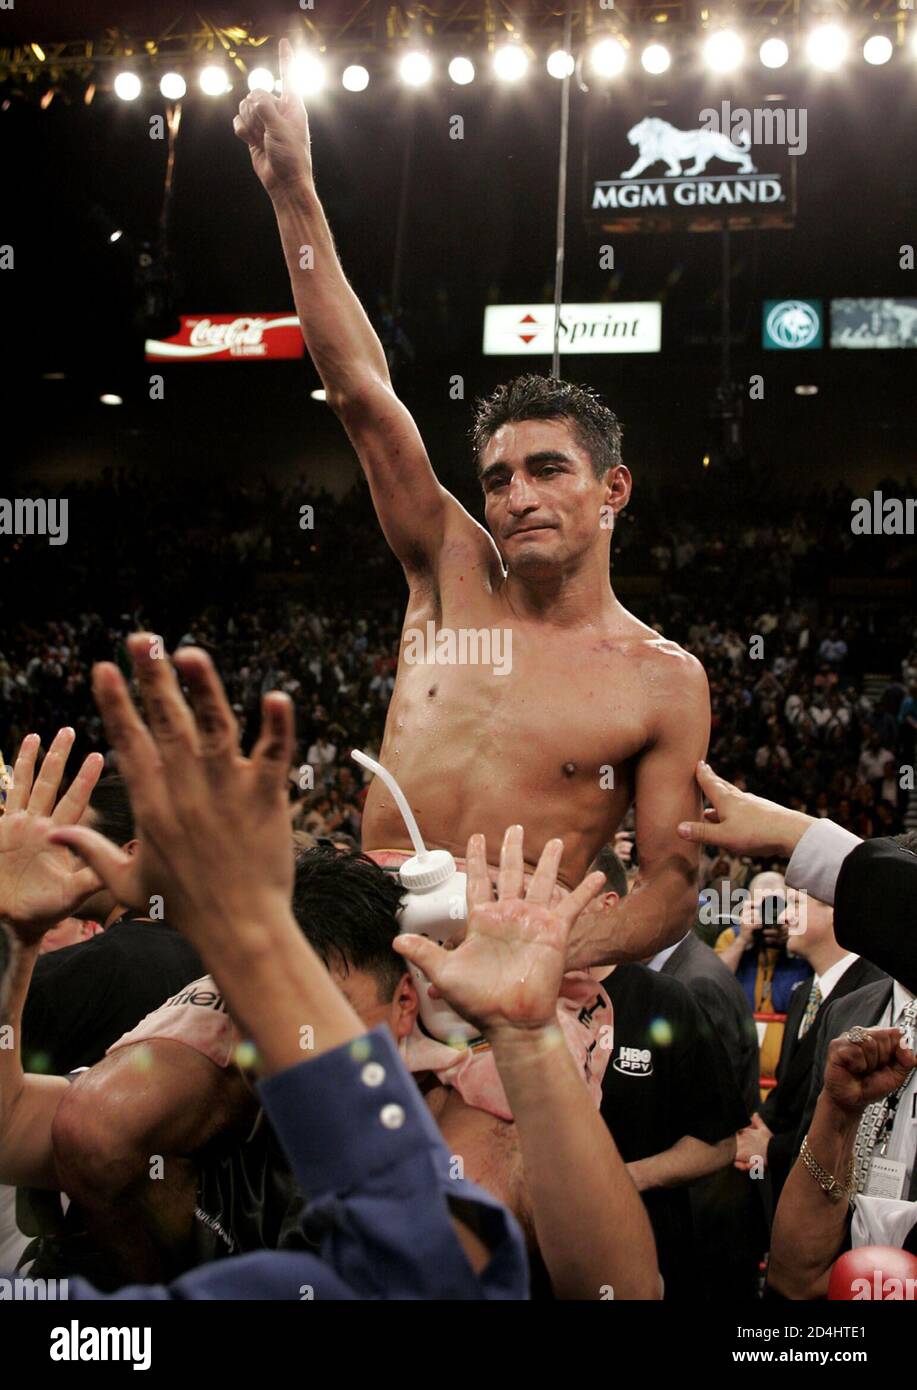 Super featherweight boxer Erik Morales of Tijuana, Mexico celebrates his victory over [Manny Pacquiao of Manila], Philippines at the MGM Grand Garden Arena in Las Vegas, Nevada March 19, 2005. [Morales beat Pacquiao in a 12-round fight by unanimous decision.] Stock Photo